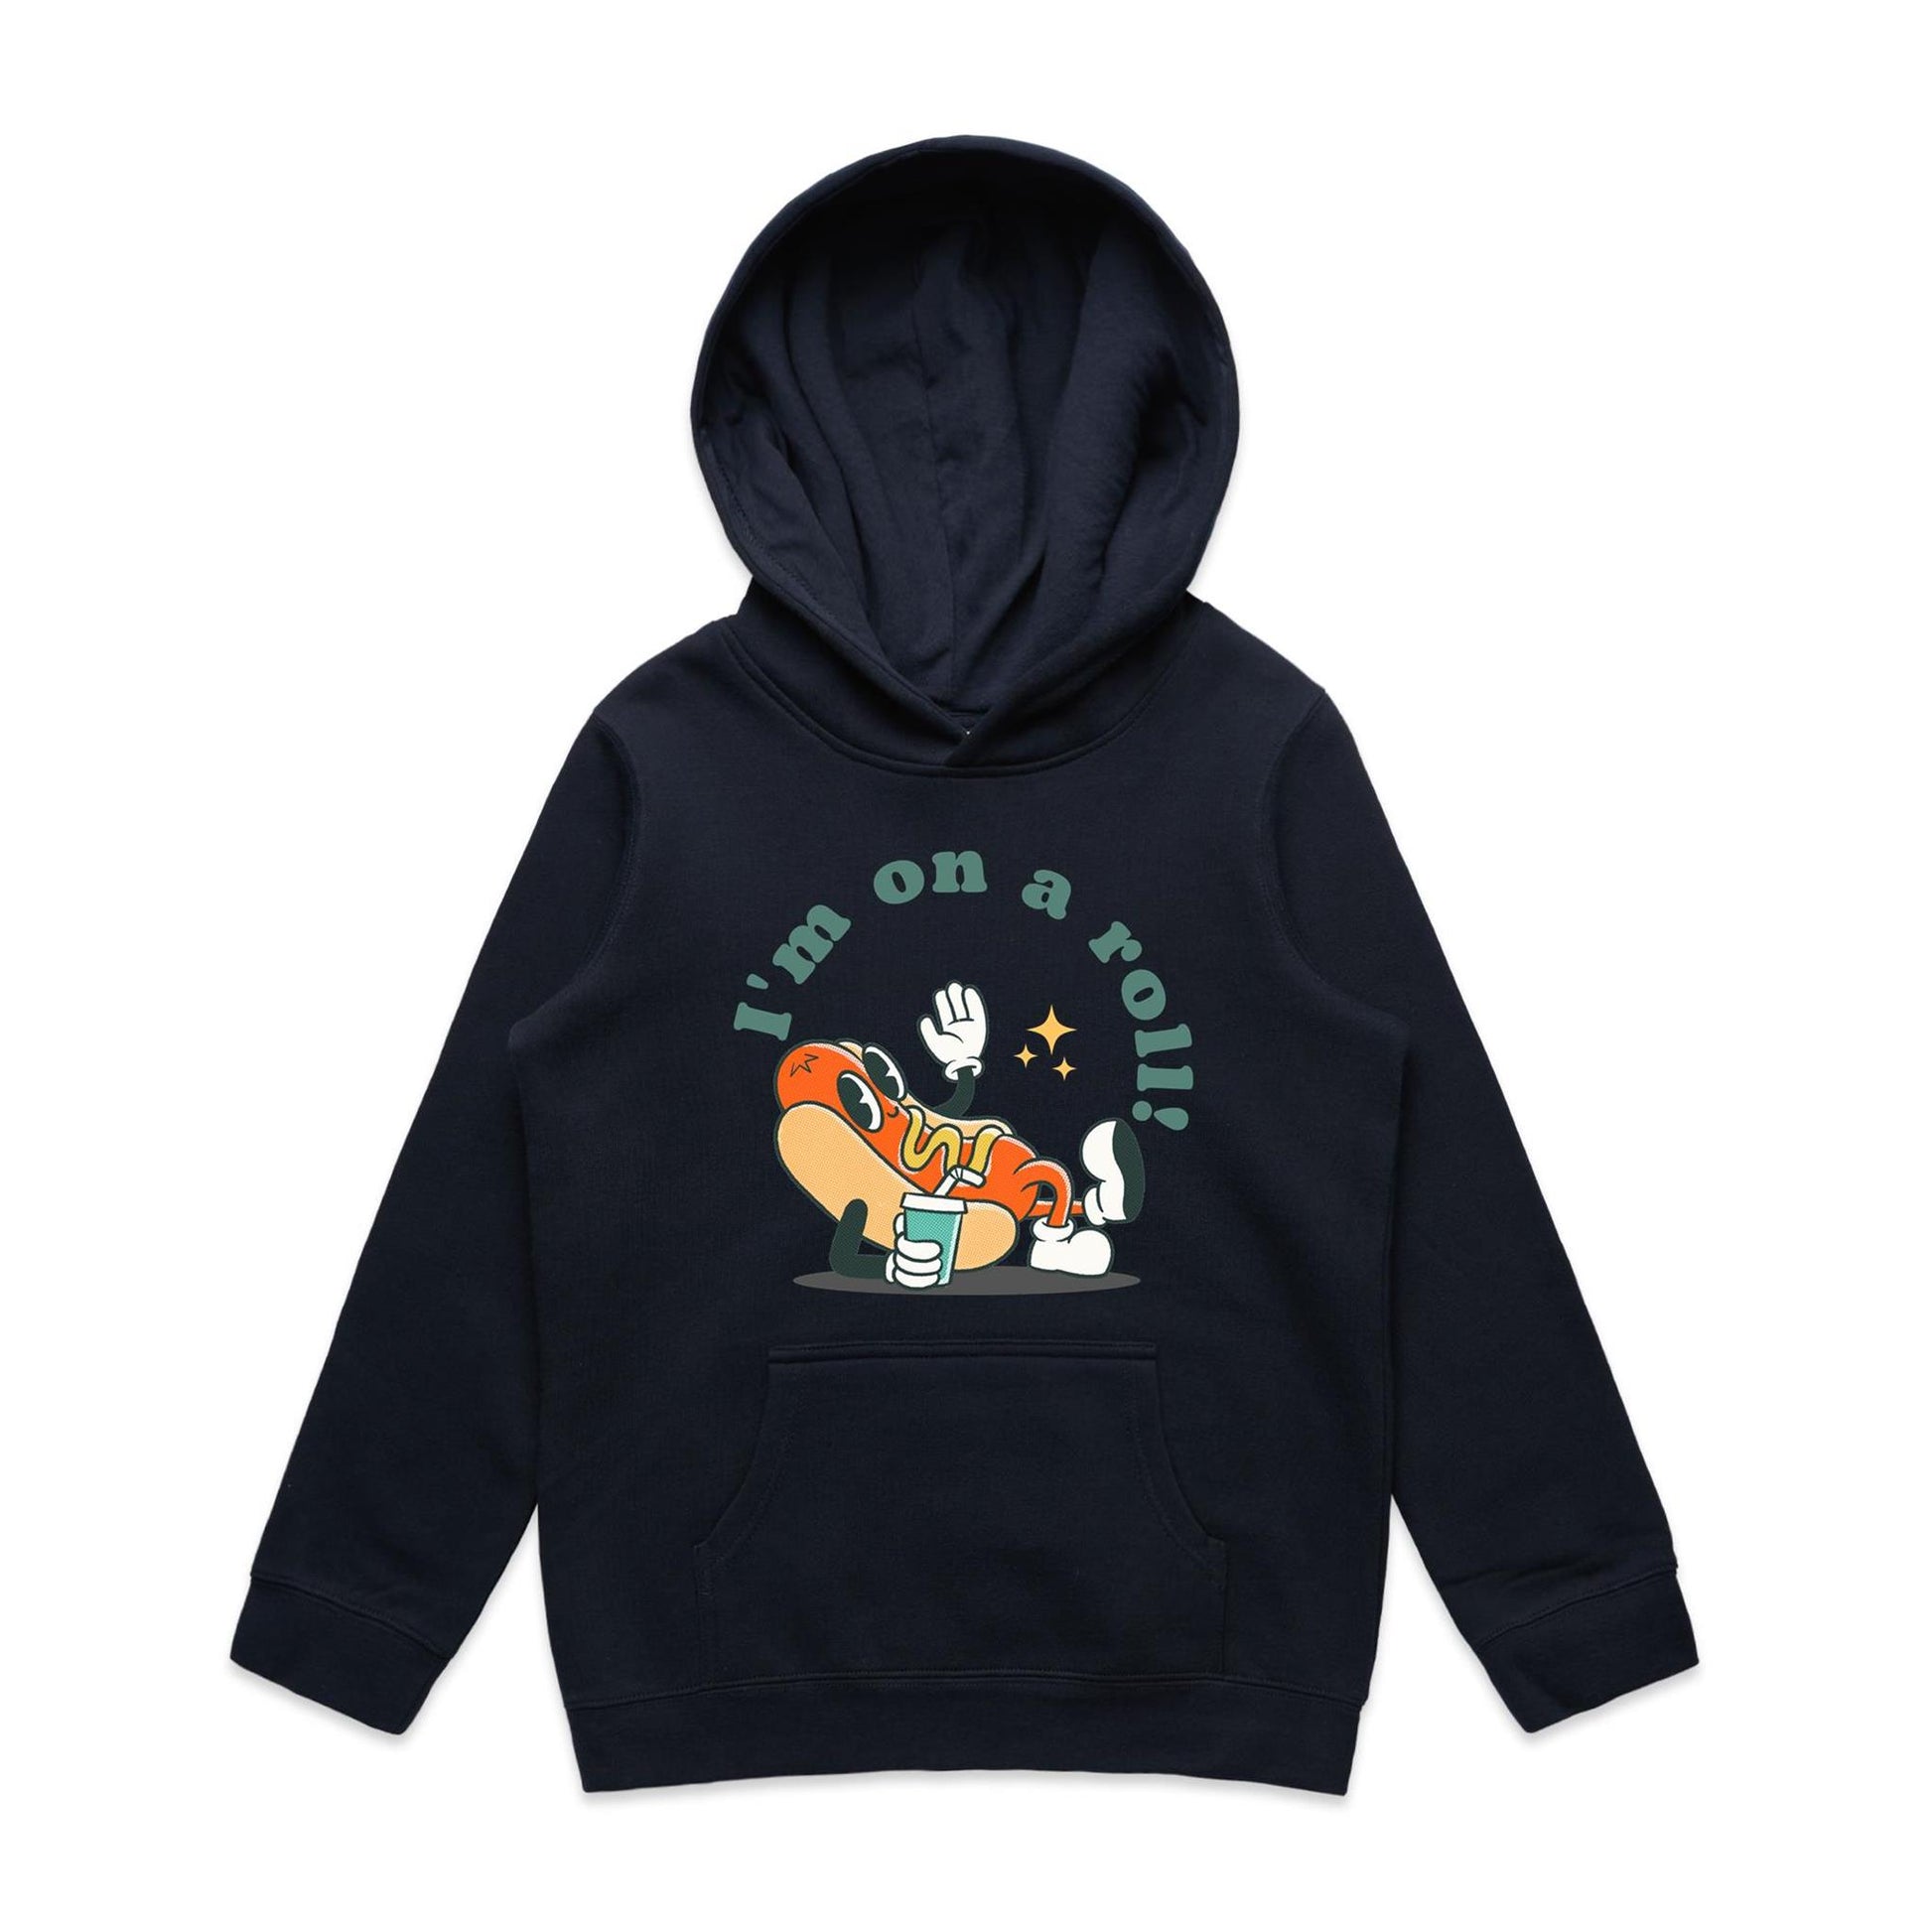 Hot Dog, I'm On A Roll - Youth Supply Hood Navy Kids Hoodie Food Retro